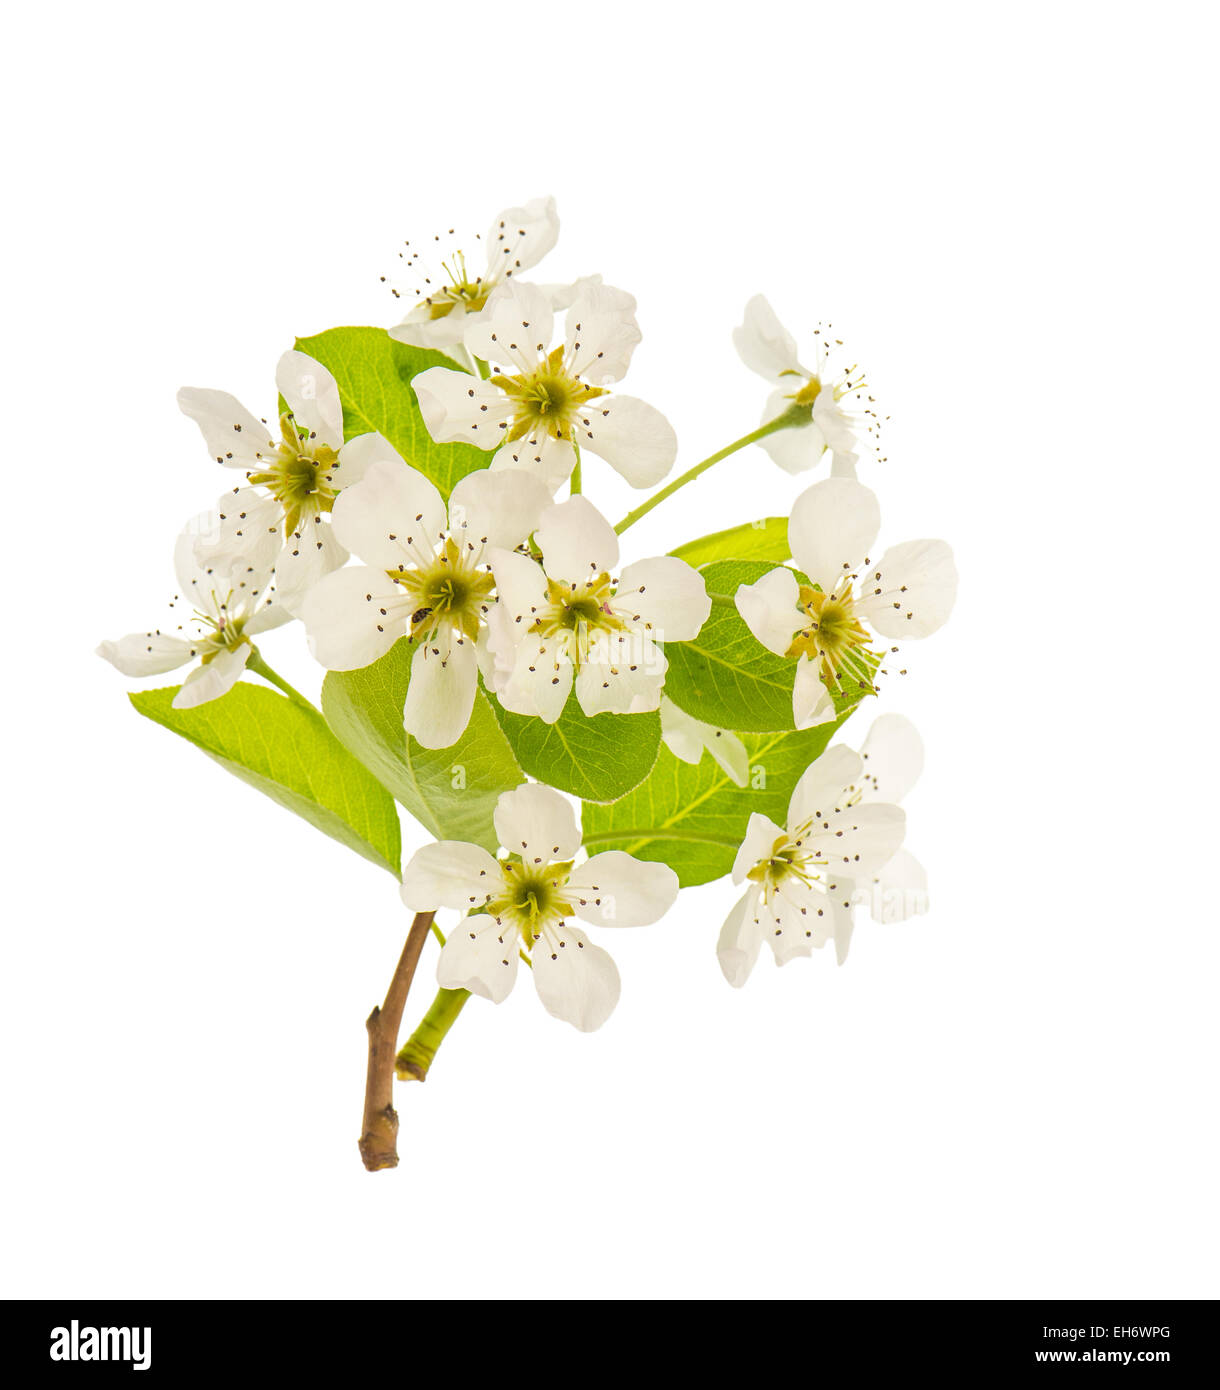 Blossoms of pear tree. Spring flowers isolated on white background Stock Photo